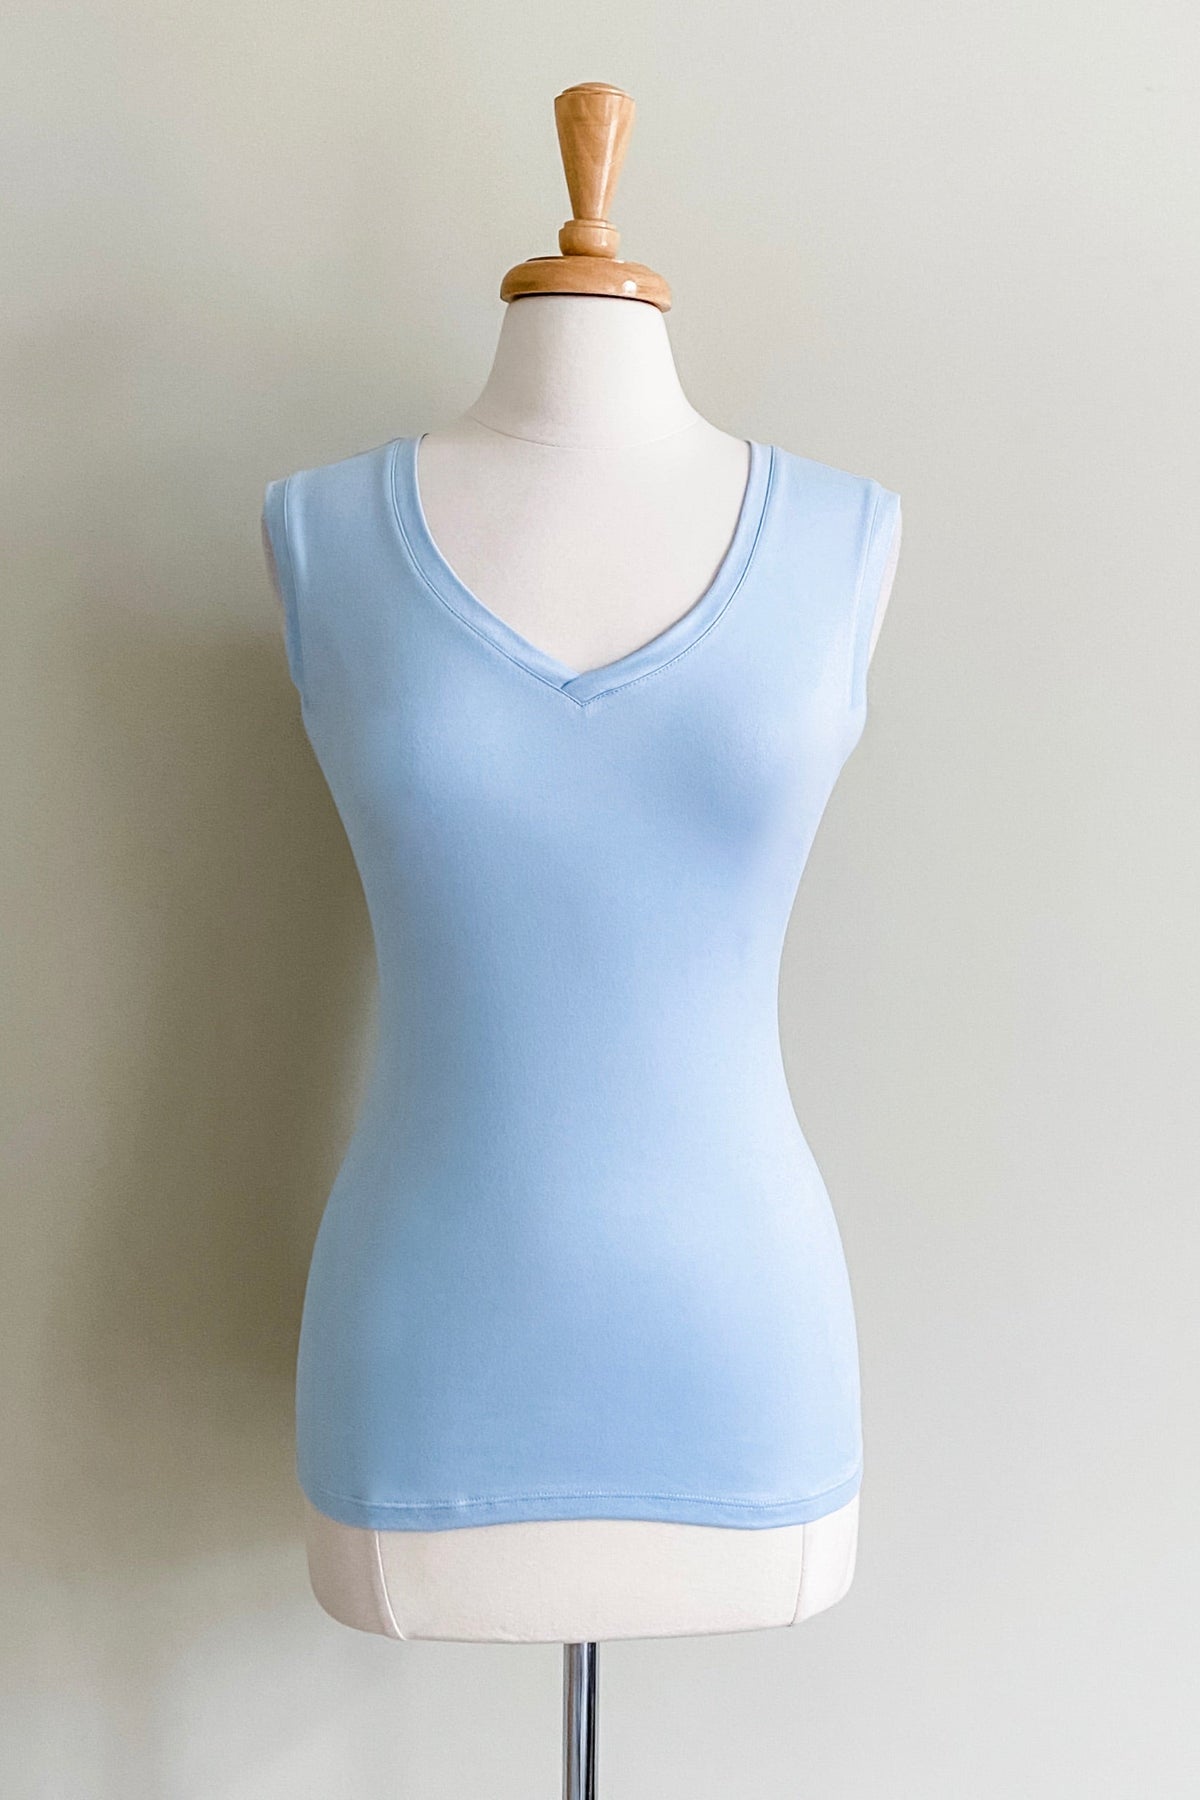 Convertible Cami Top in Light Blue